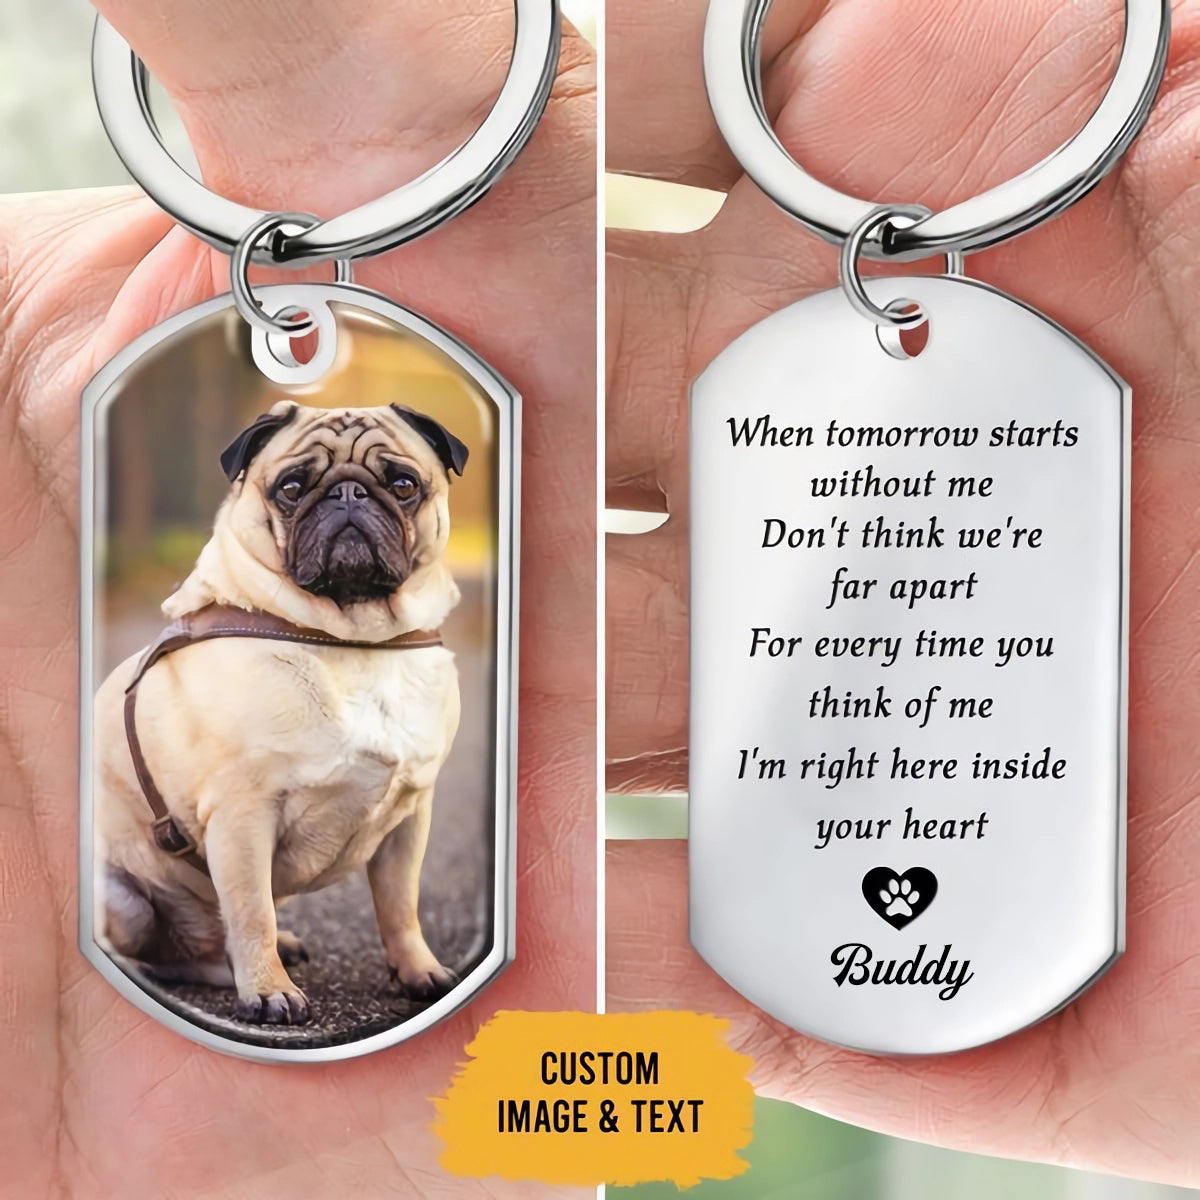 Dog Keychain Dog Memorial Gifts For Loss Of Dog dog - Personalized Keychain - Pet Memorial Gifts Cat Keychain